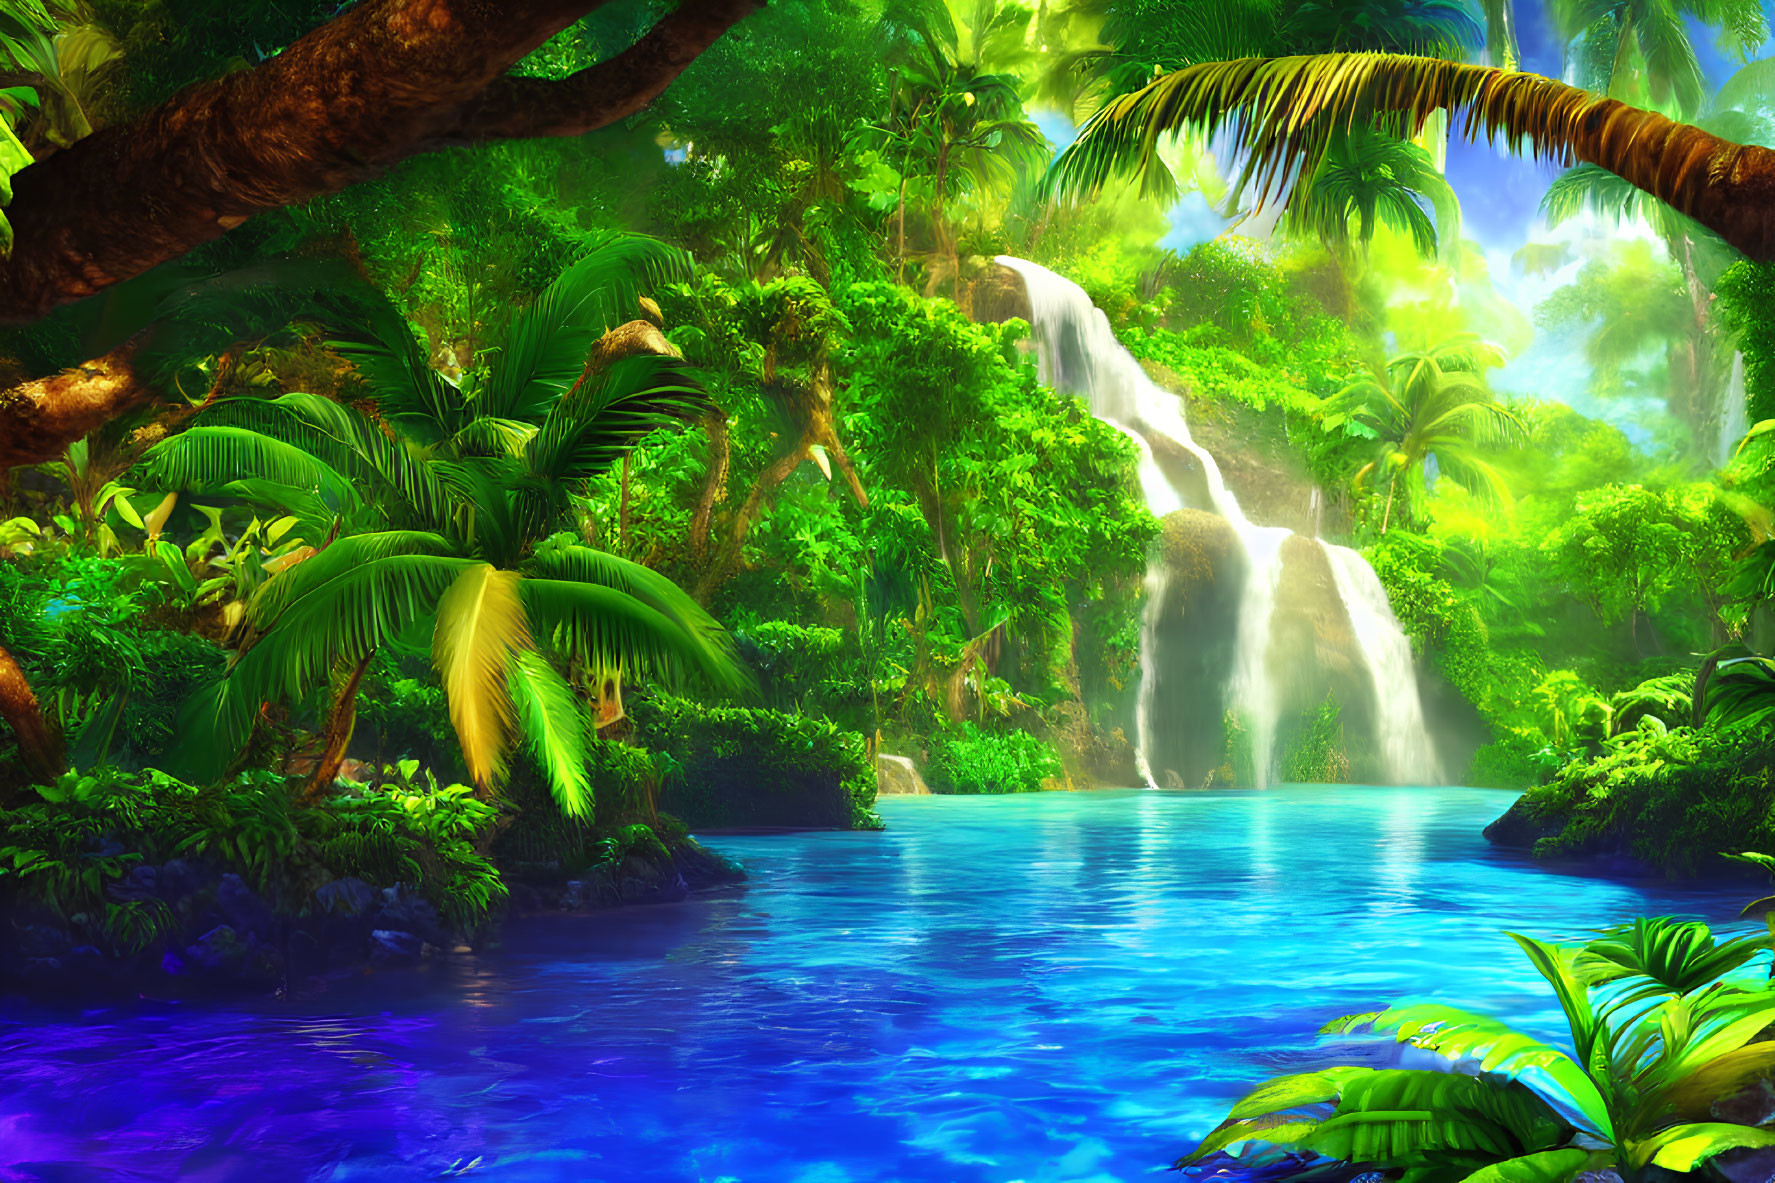 Tropical paradise with palm trees, waterfall, and blue river